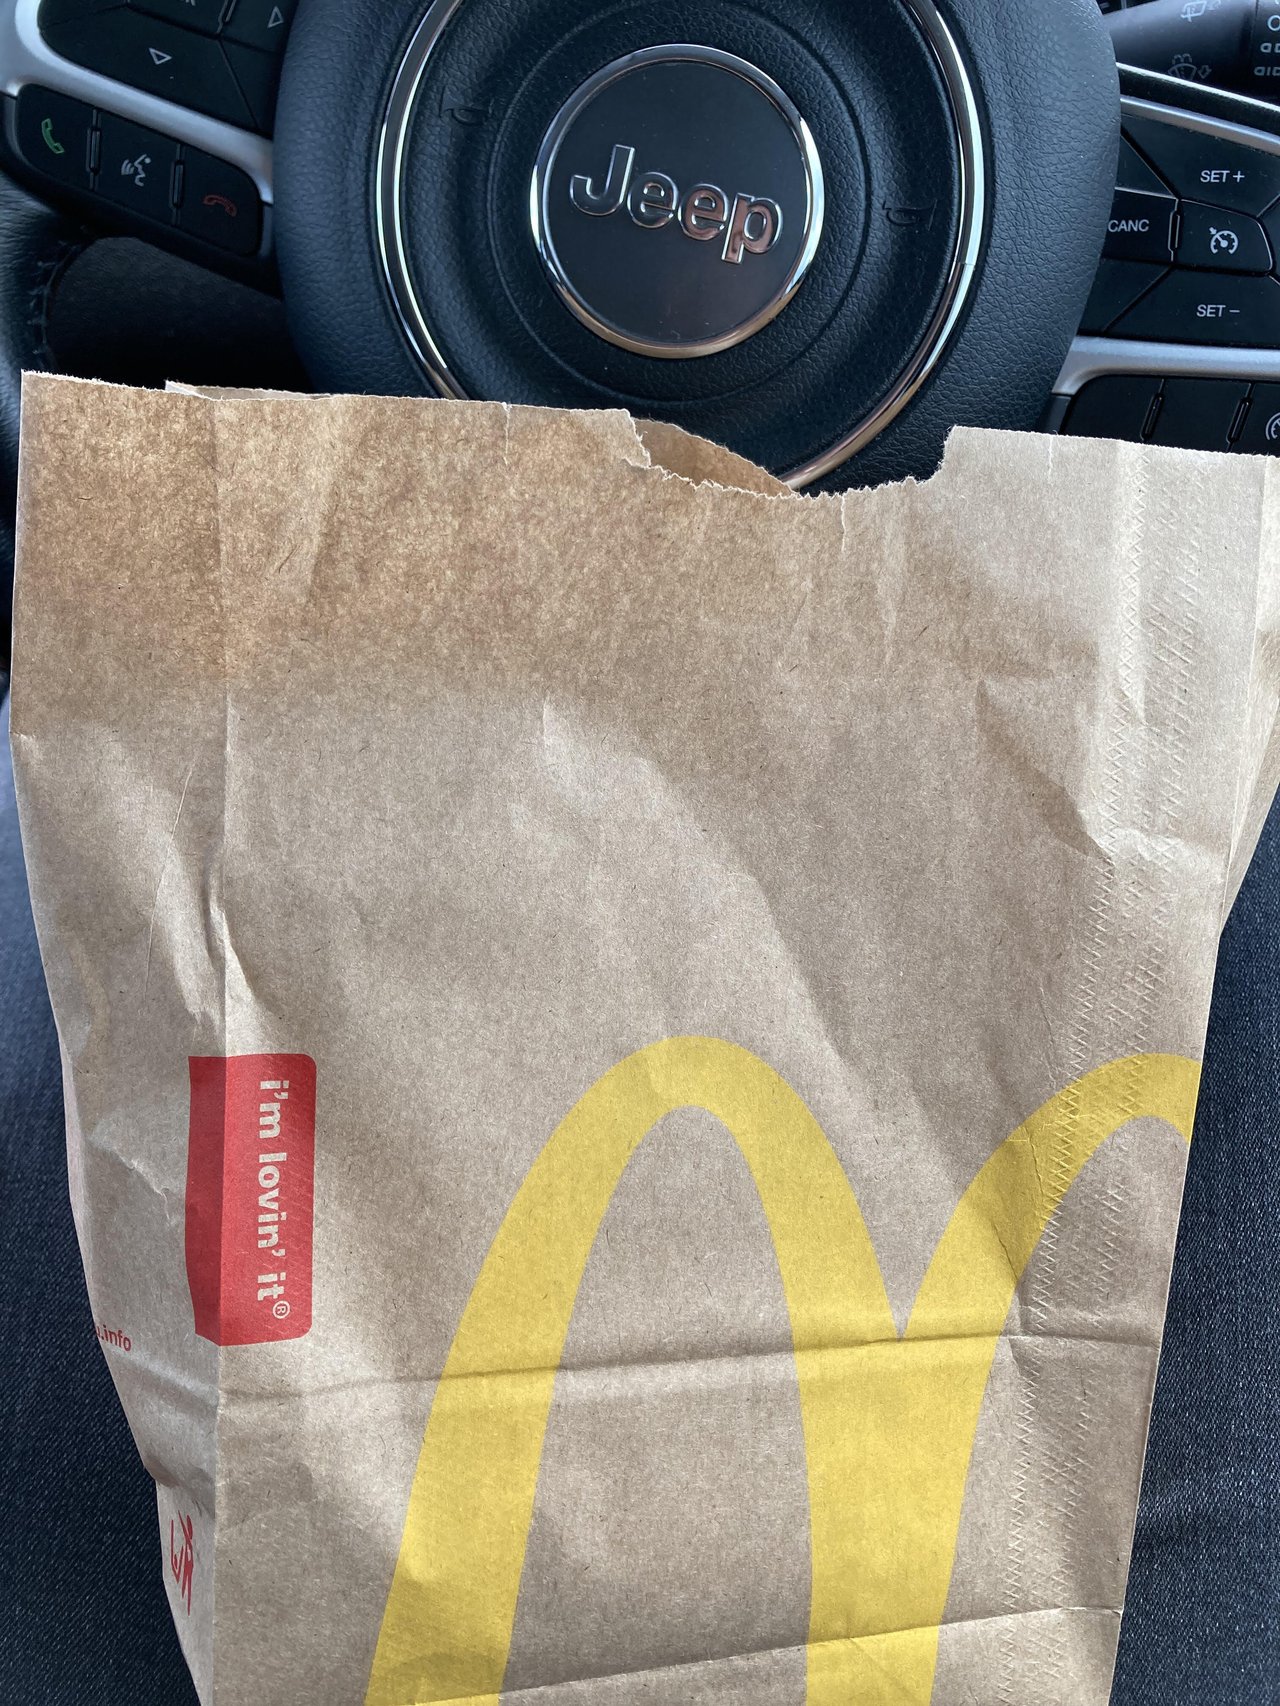 McDonald's bag in front of a car steering wheel